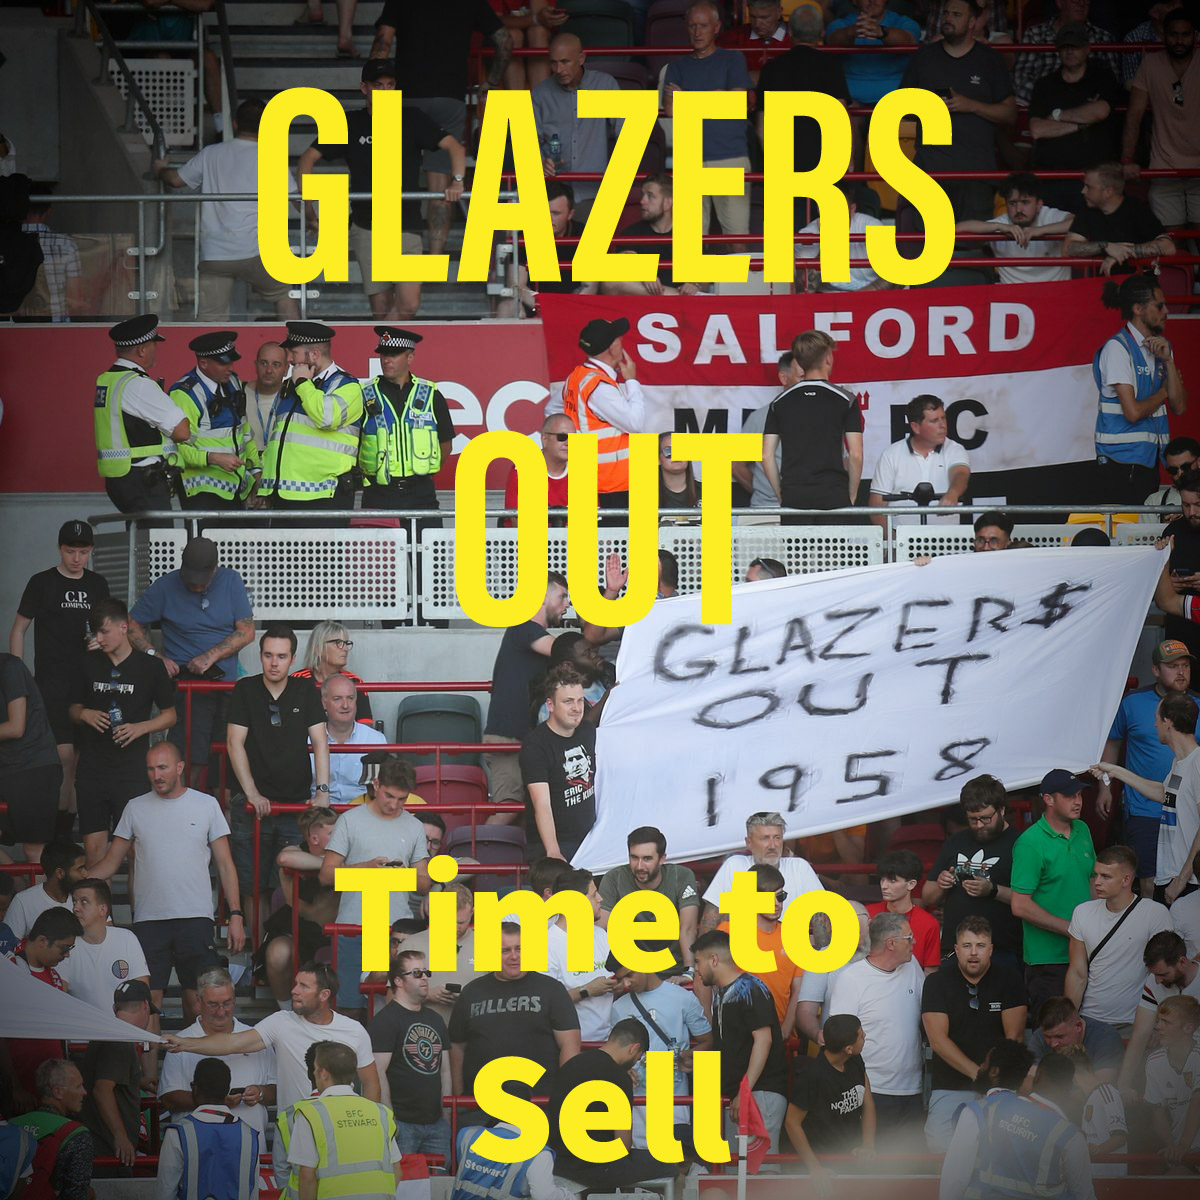 The fans r fed up of waiting 
The players r fed up of waiting 
The manger and the stuff r fed up of waiting it's time to stop pissing about sell the Club n fuck of no one want u here #GlazersOutNOW #timetosell #GlazersFullSaleOnly #timetogo #drivethemout